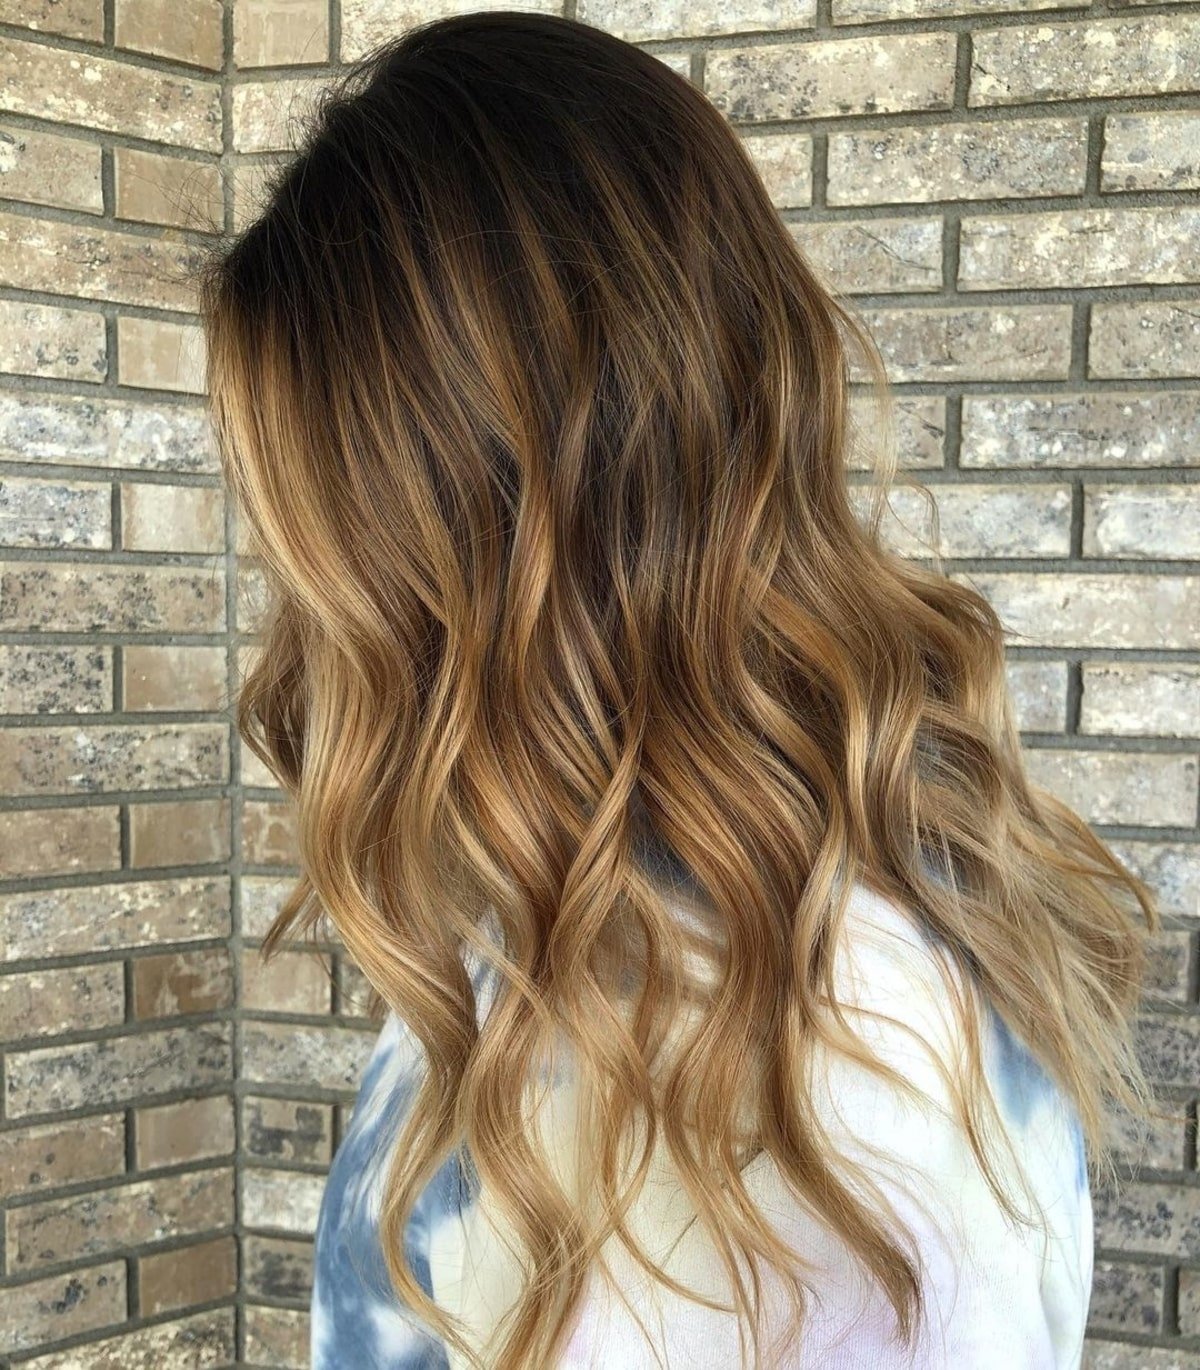 Melted long layers hairstyle